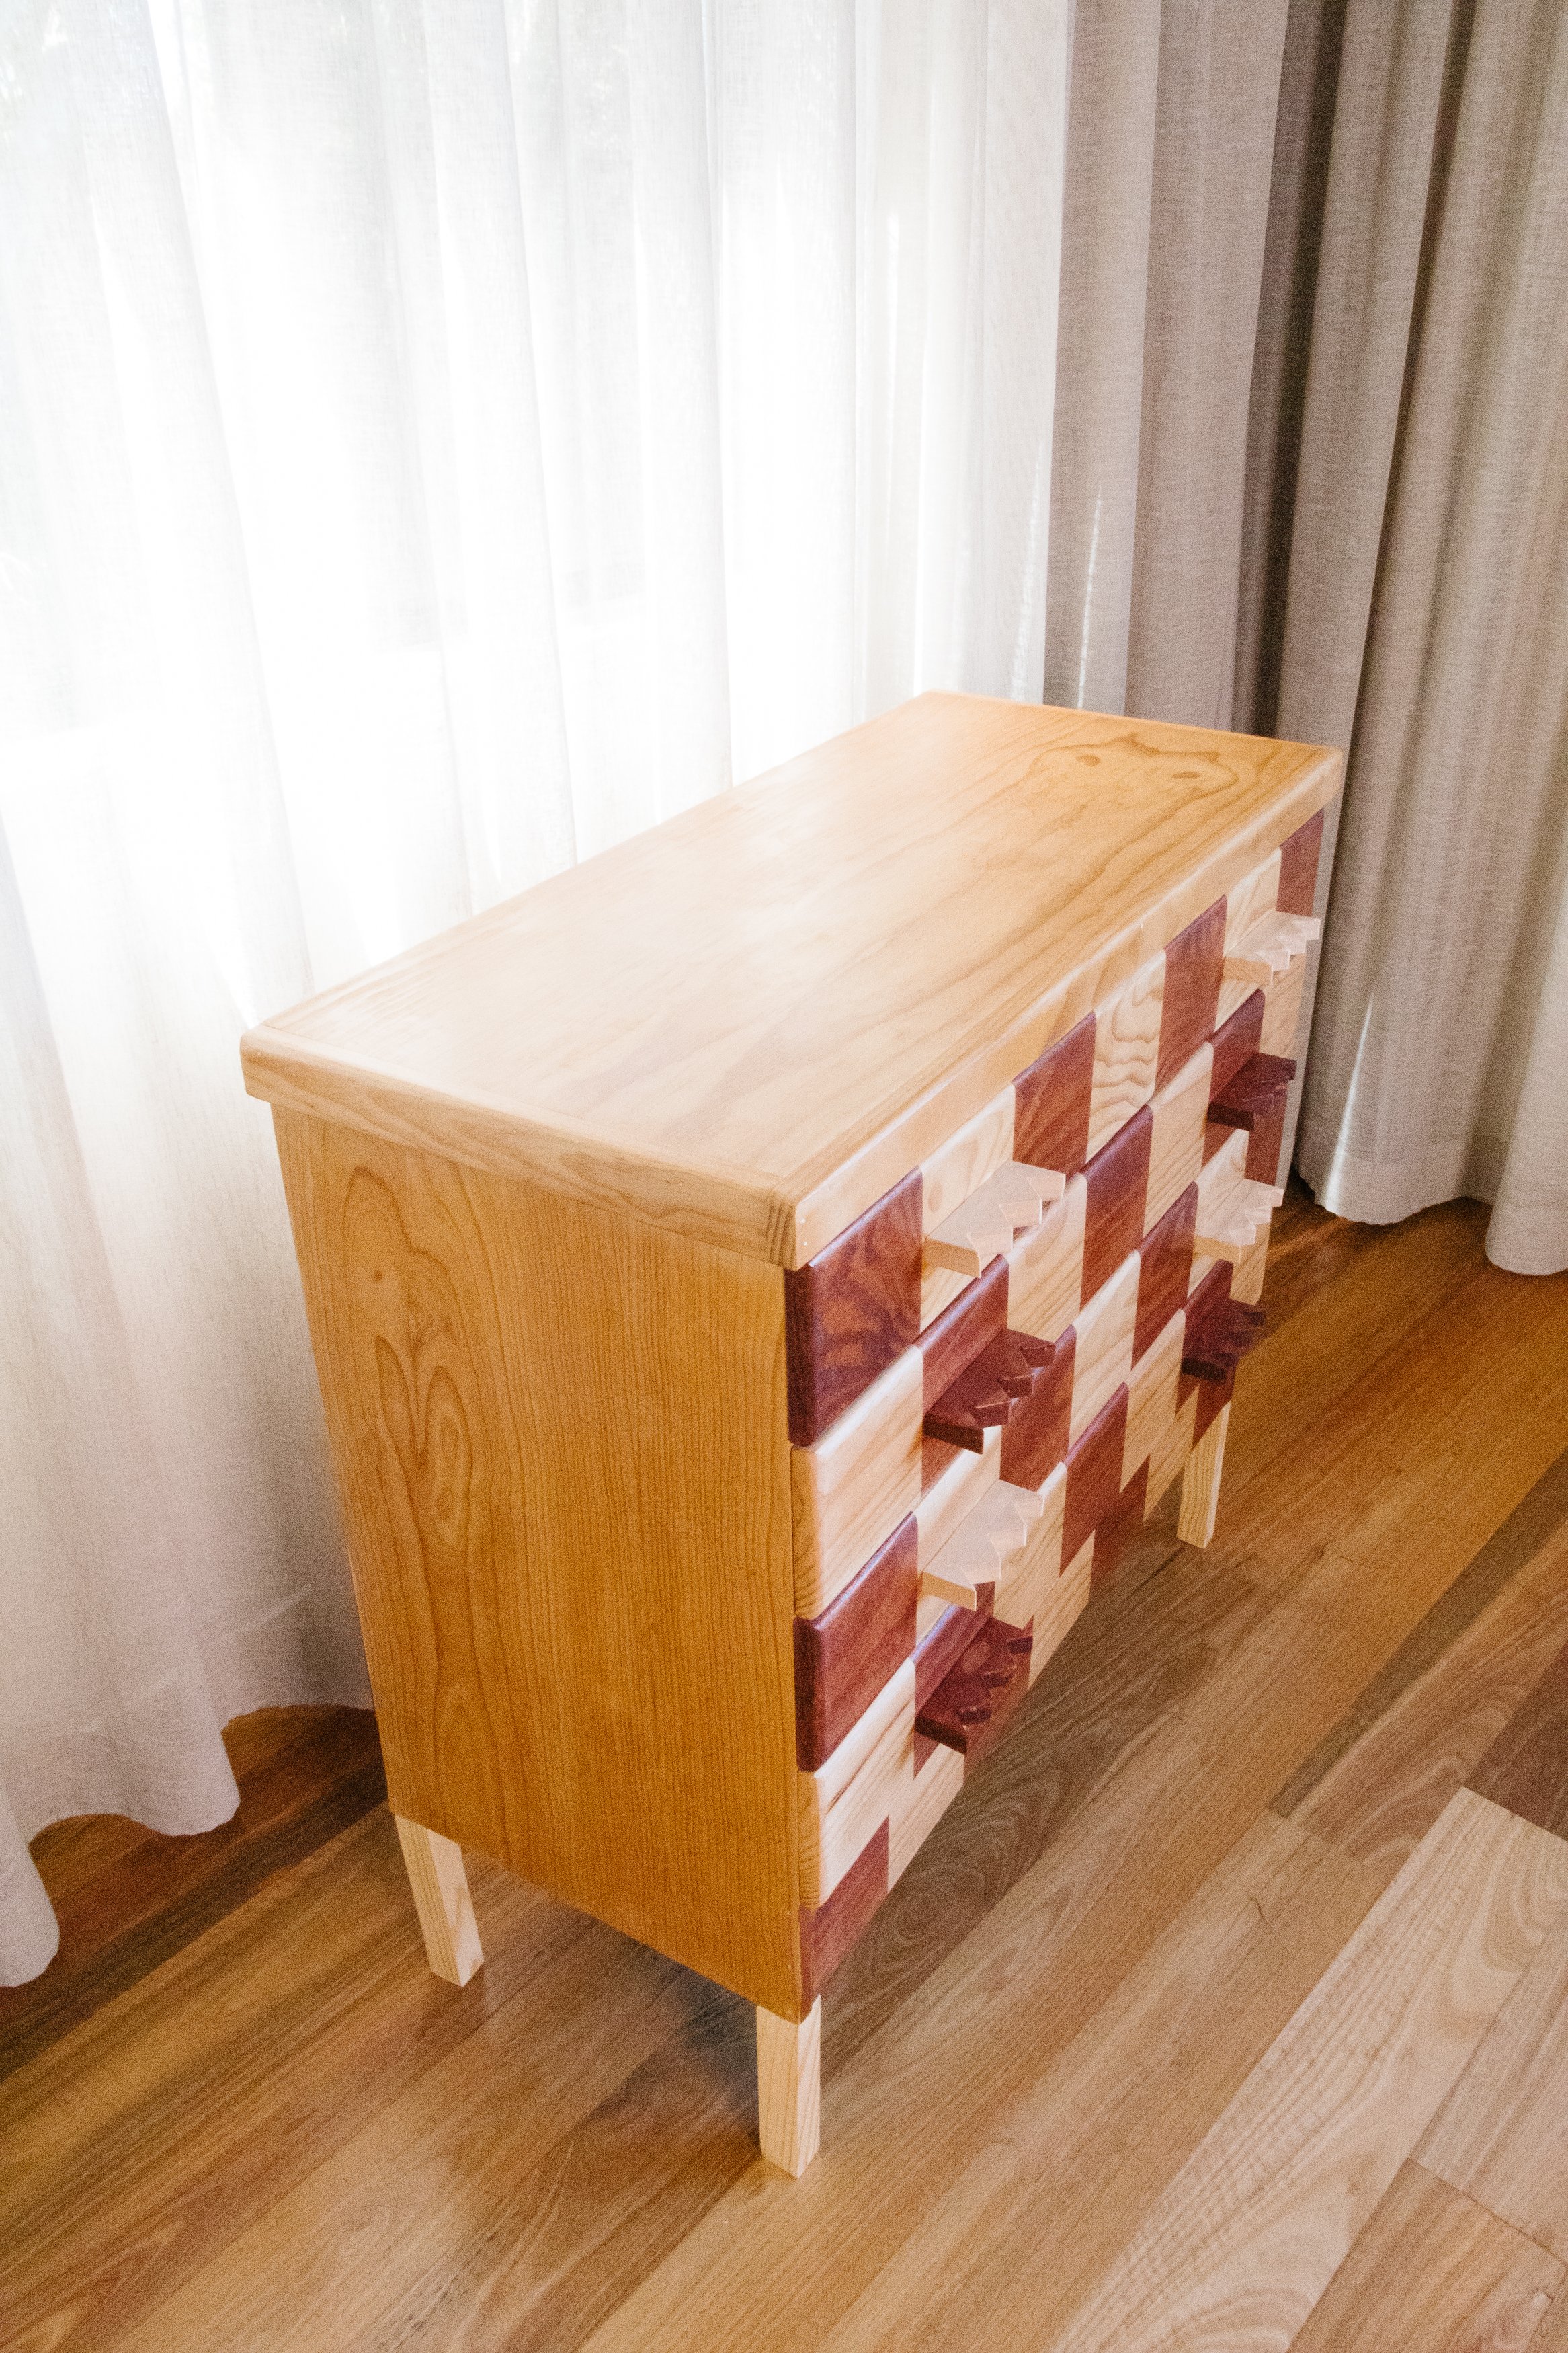 Upcycled Timber Stained Checker Drawers (12 of 79).jpg